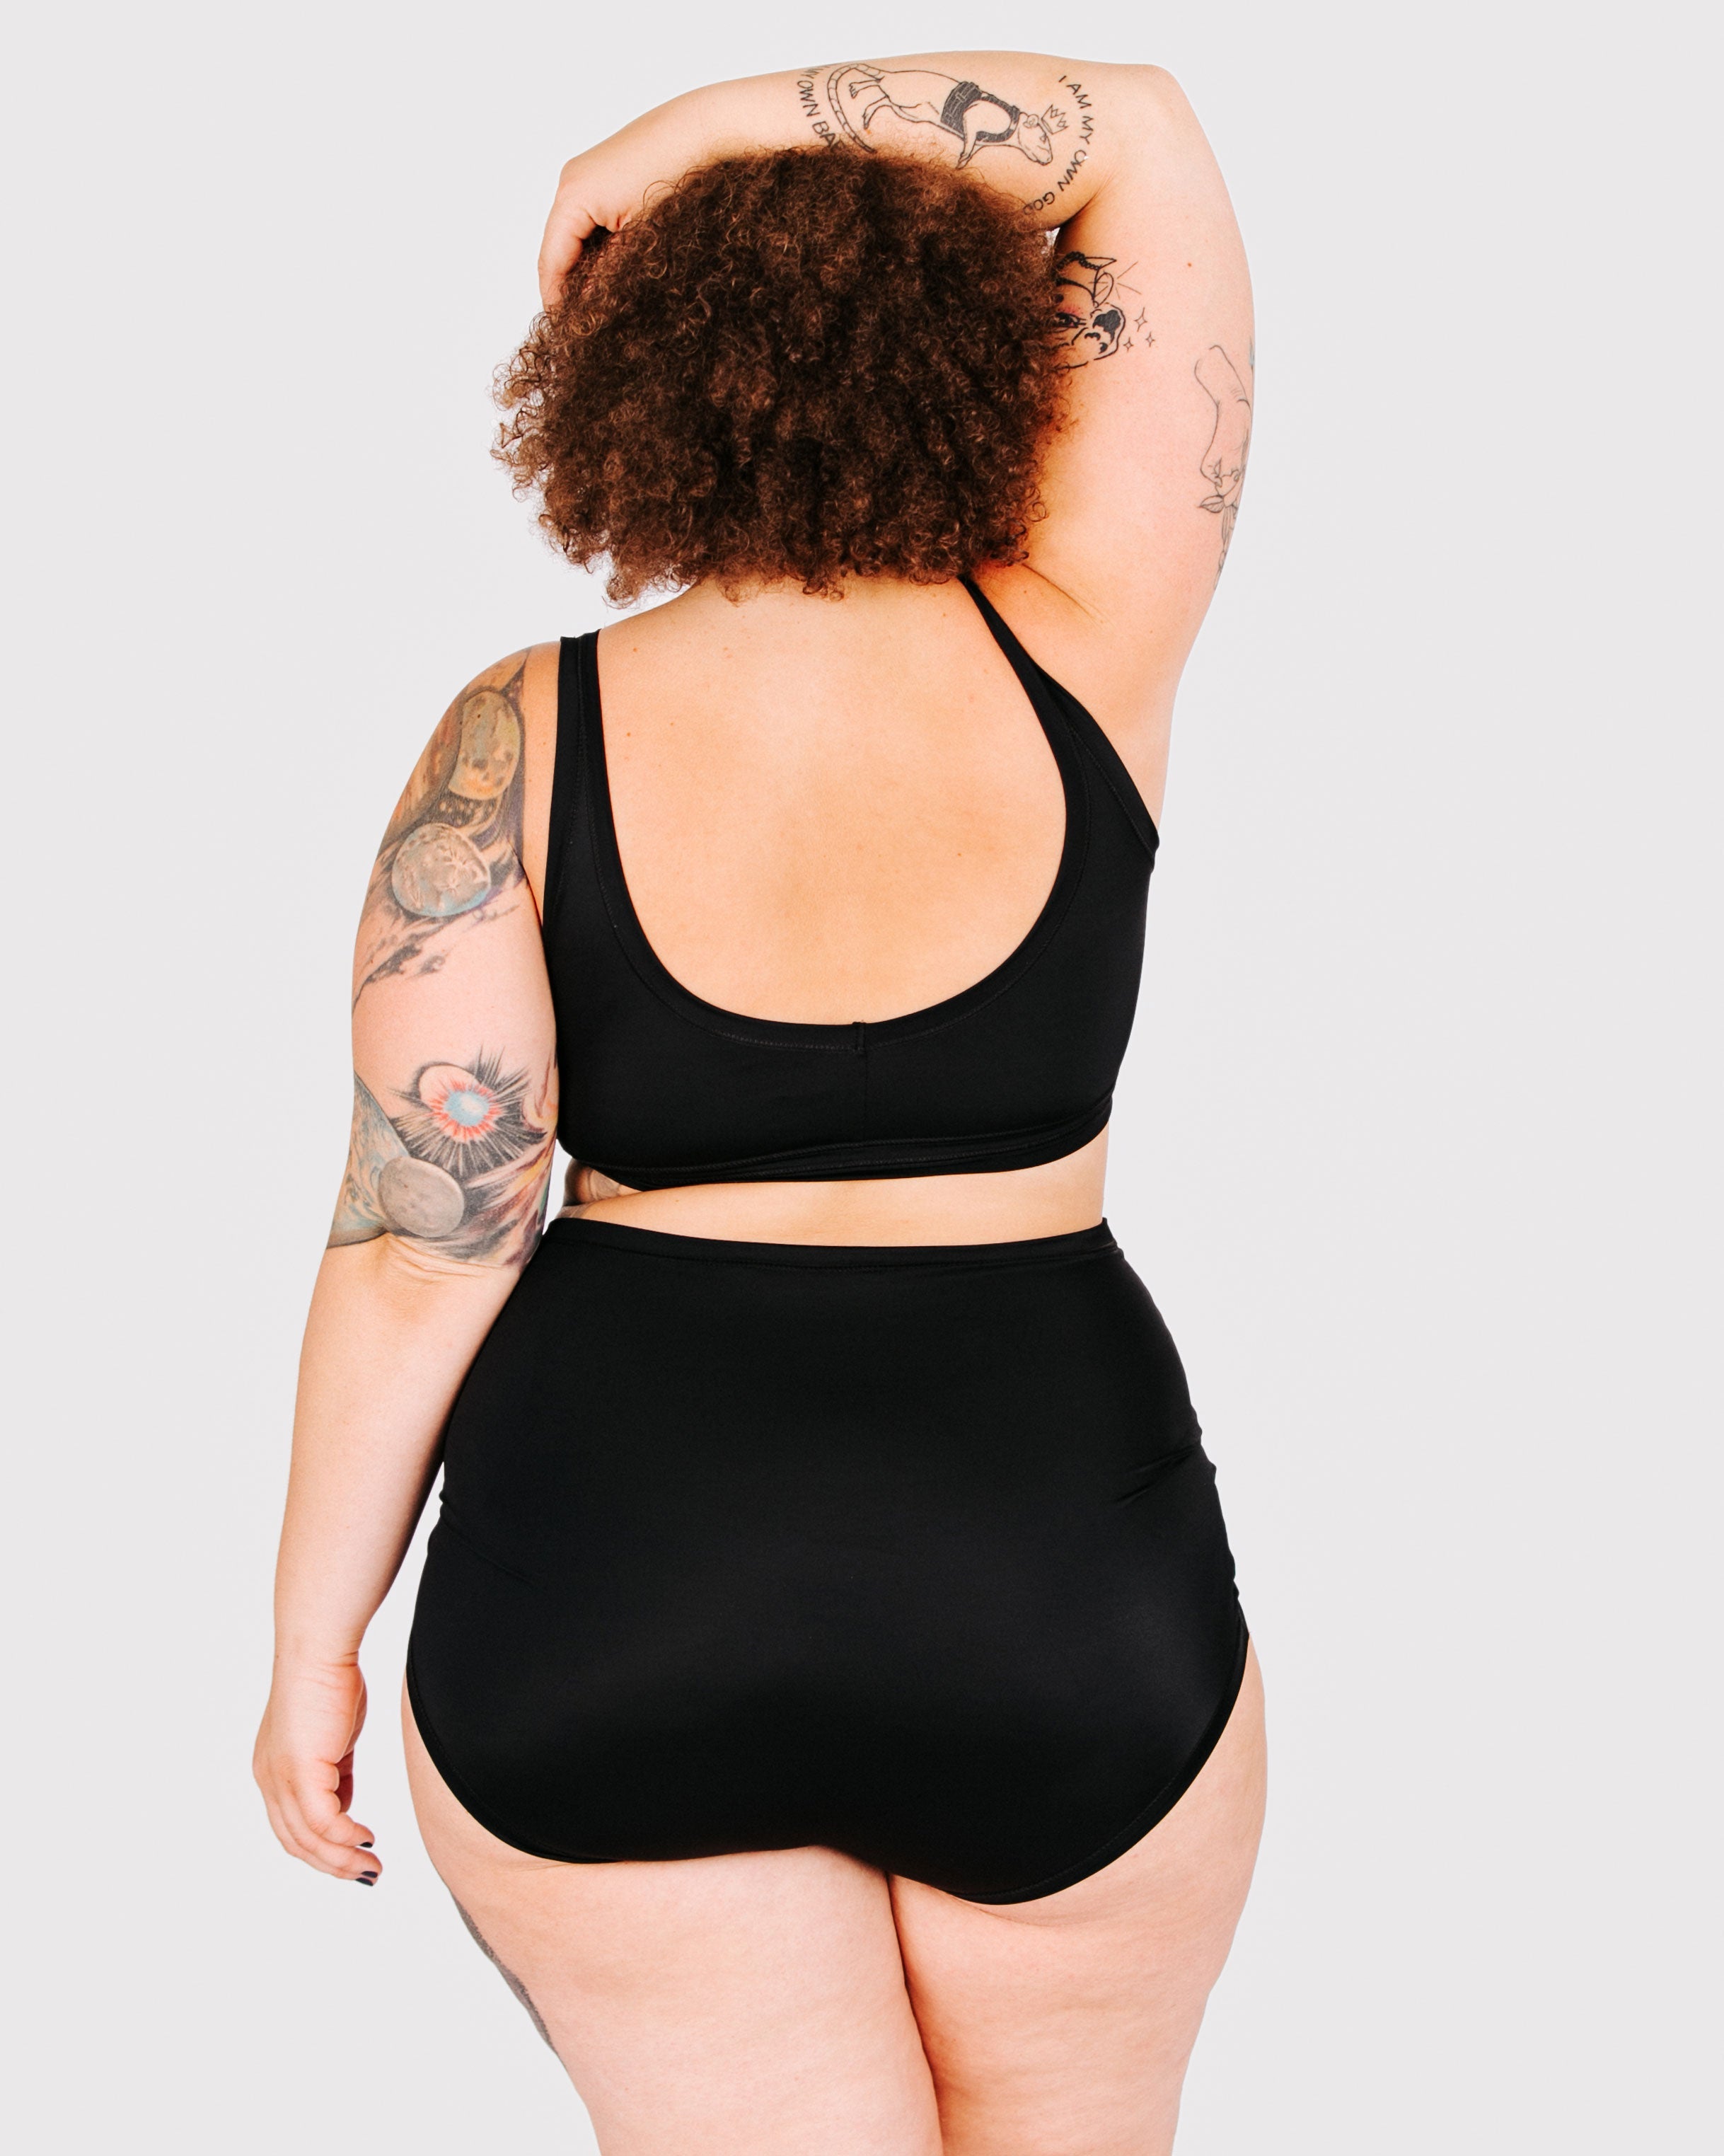 Fit photo from the back of Thunderpants recycled nylon Swimwear Sky Rise style bottoms in Plain Black, showing a wedgie-free bum, on a model.